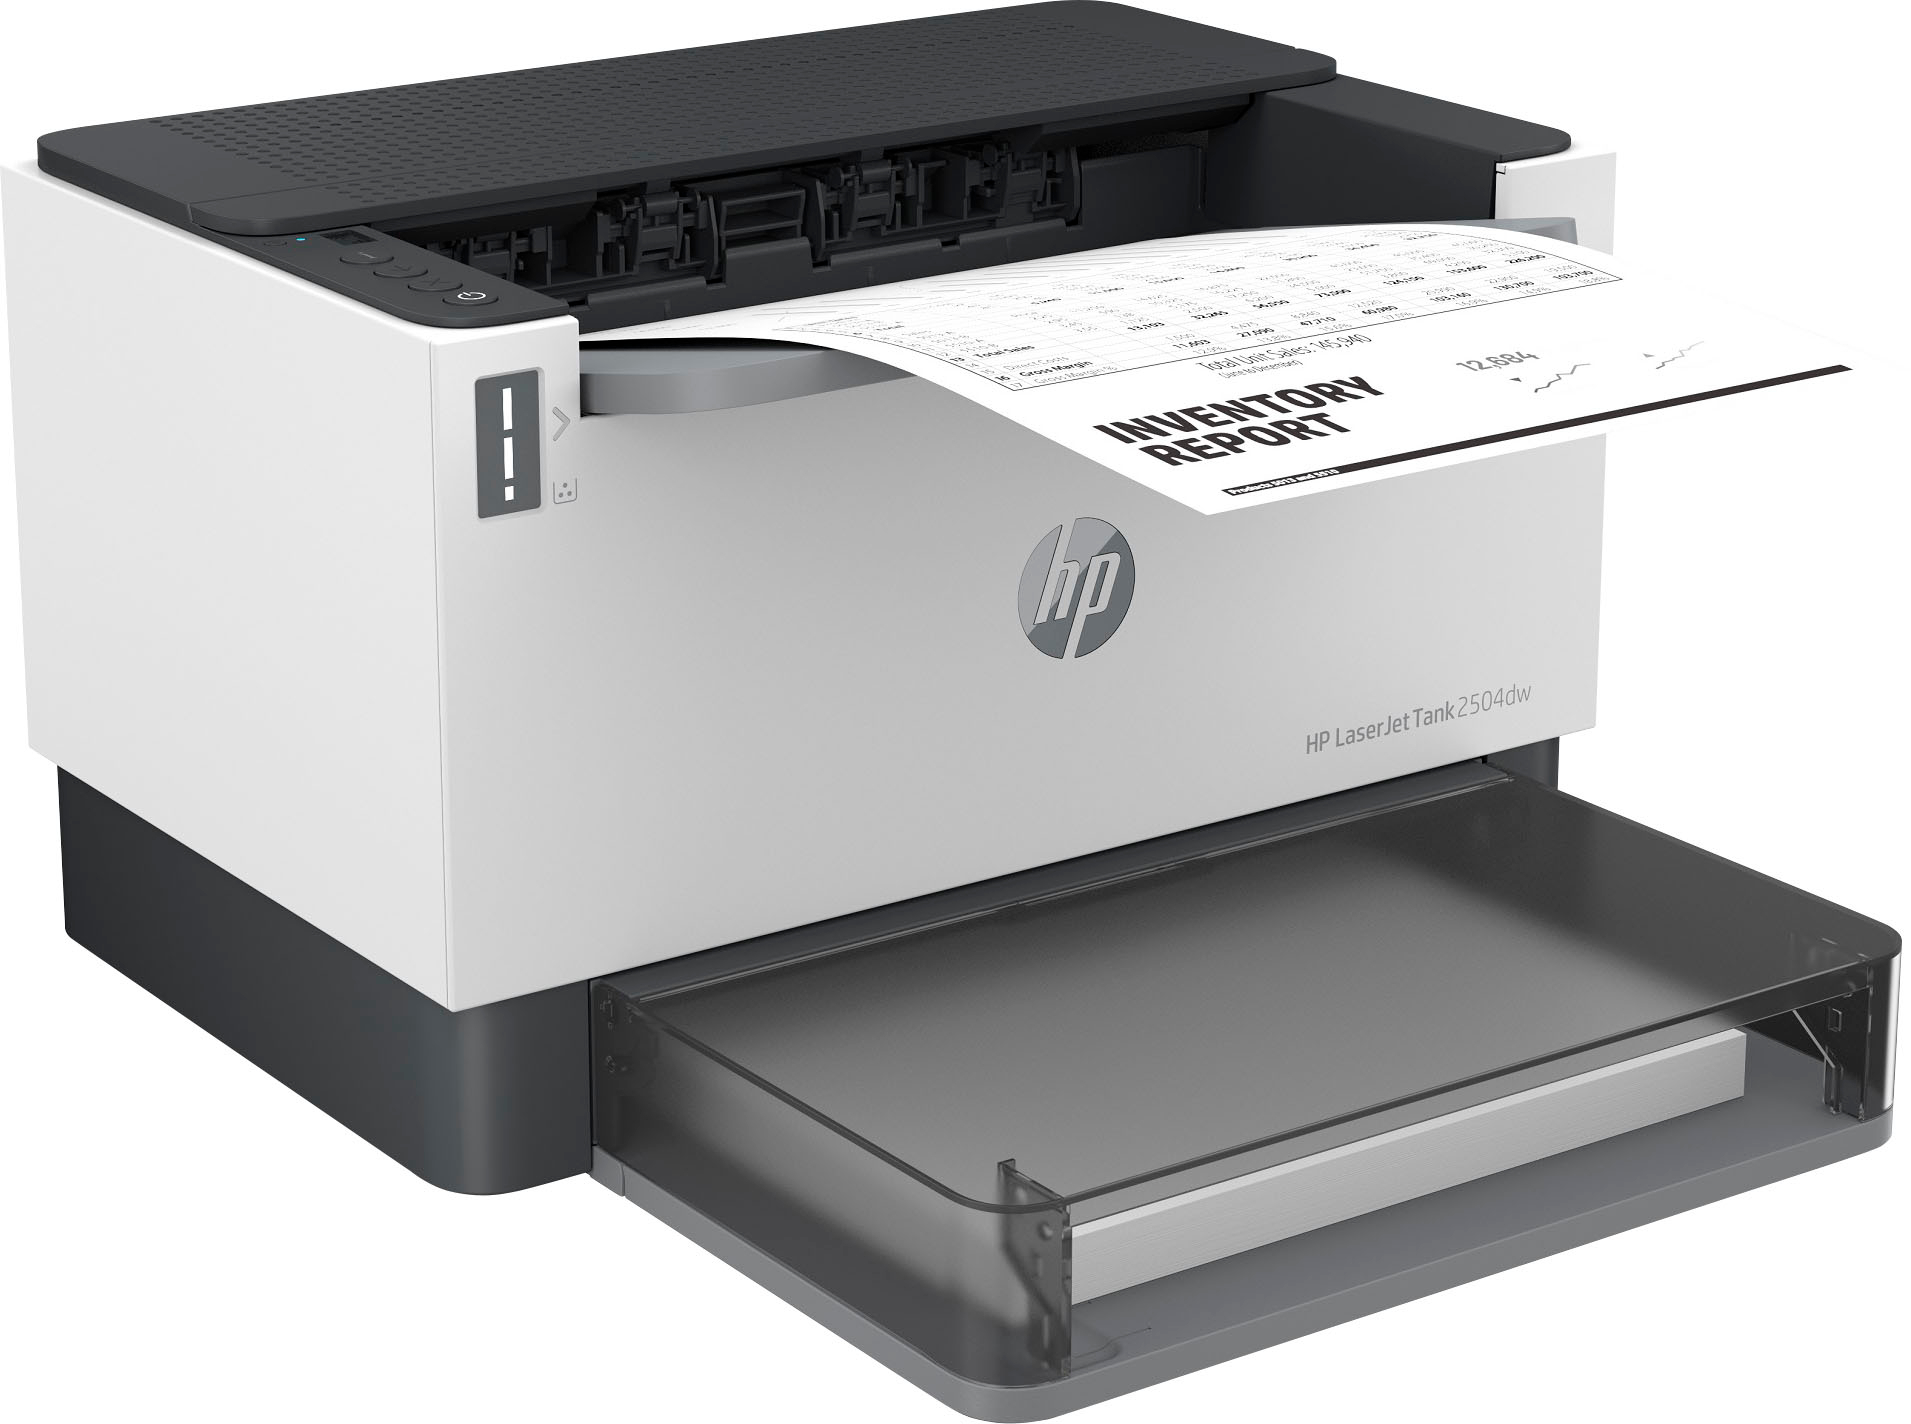 Angle View: Canon - imageCLASS MF267dw Wireless Black-and-White All-In-One Laser Printer - Black